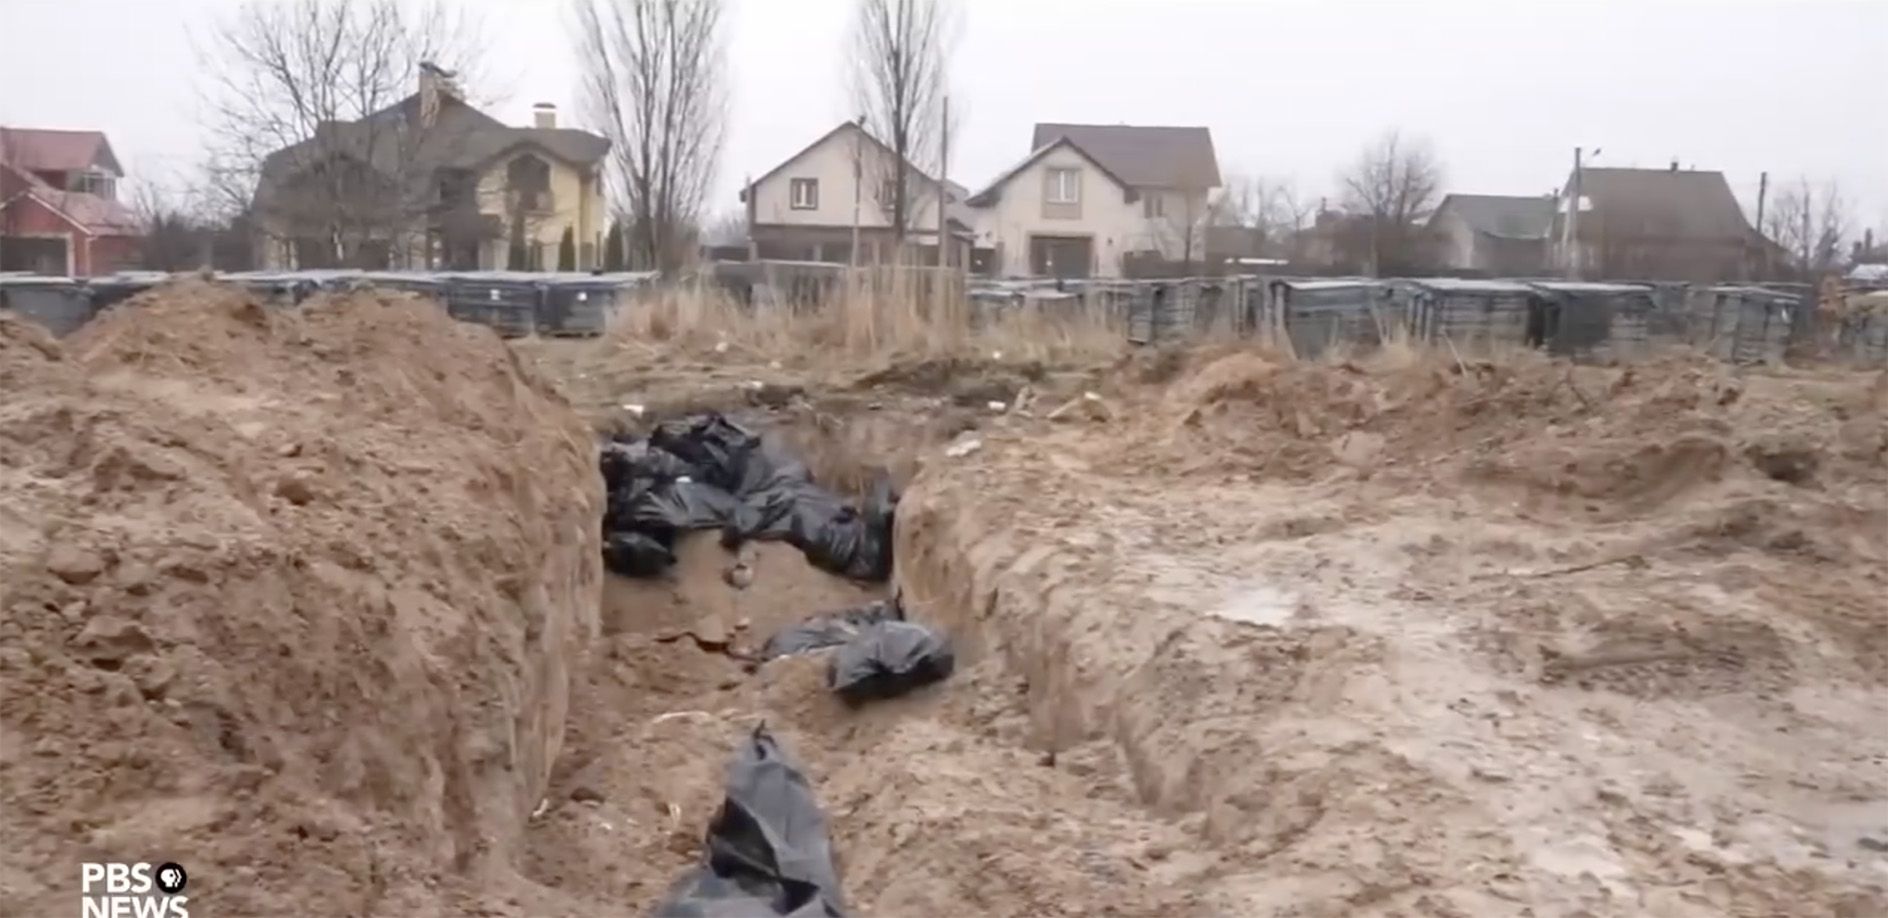 ATROCITY: Evidence of war crimes as a mass grave is discovered in Bucha, a town near Kyiv